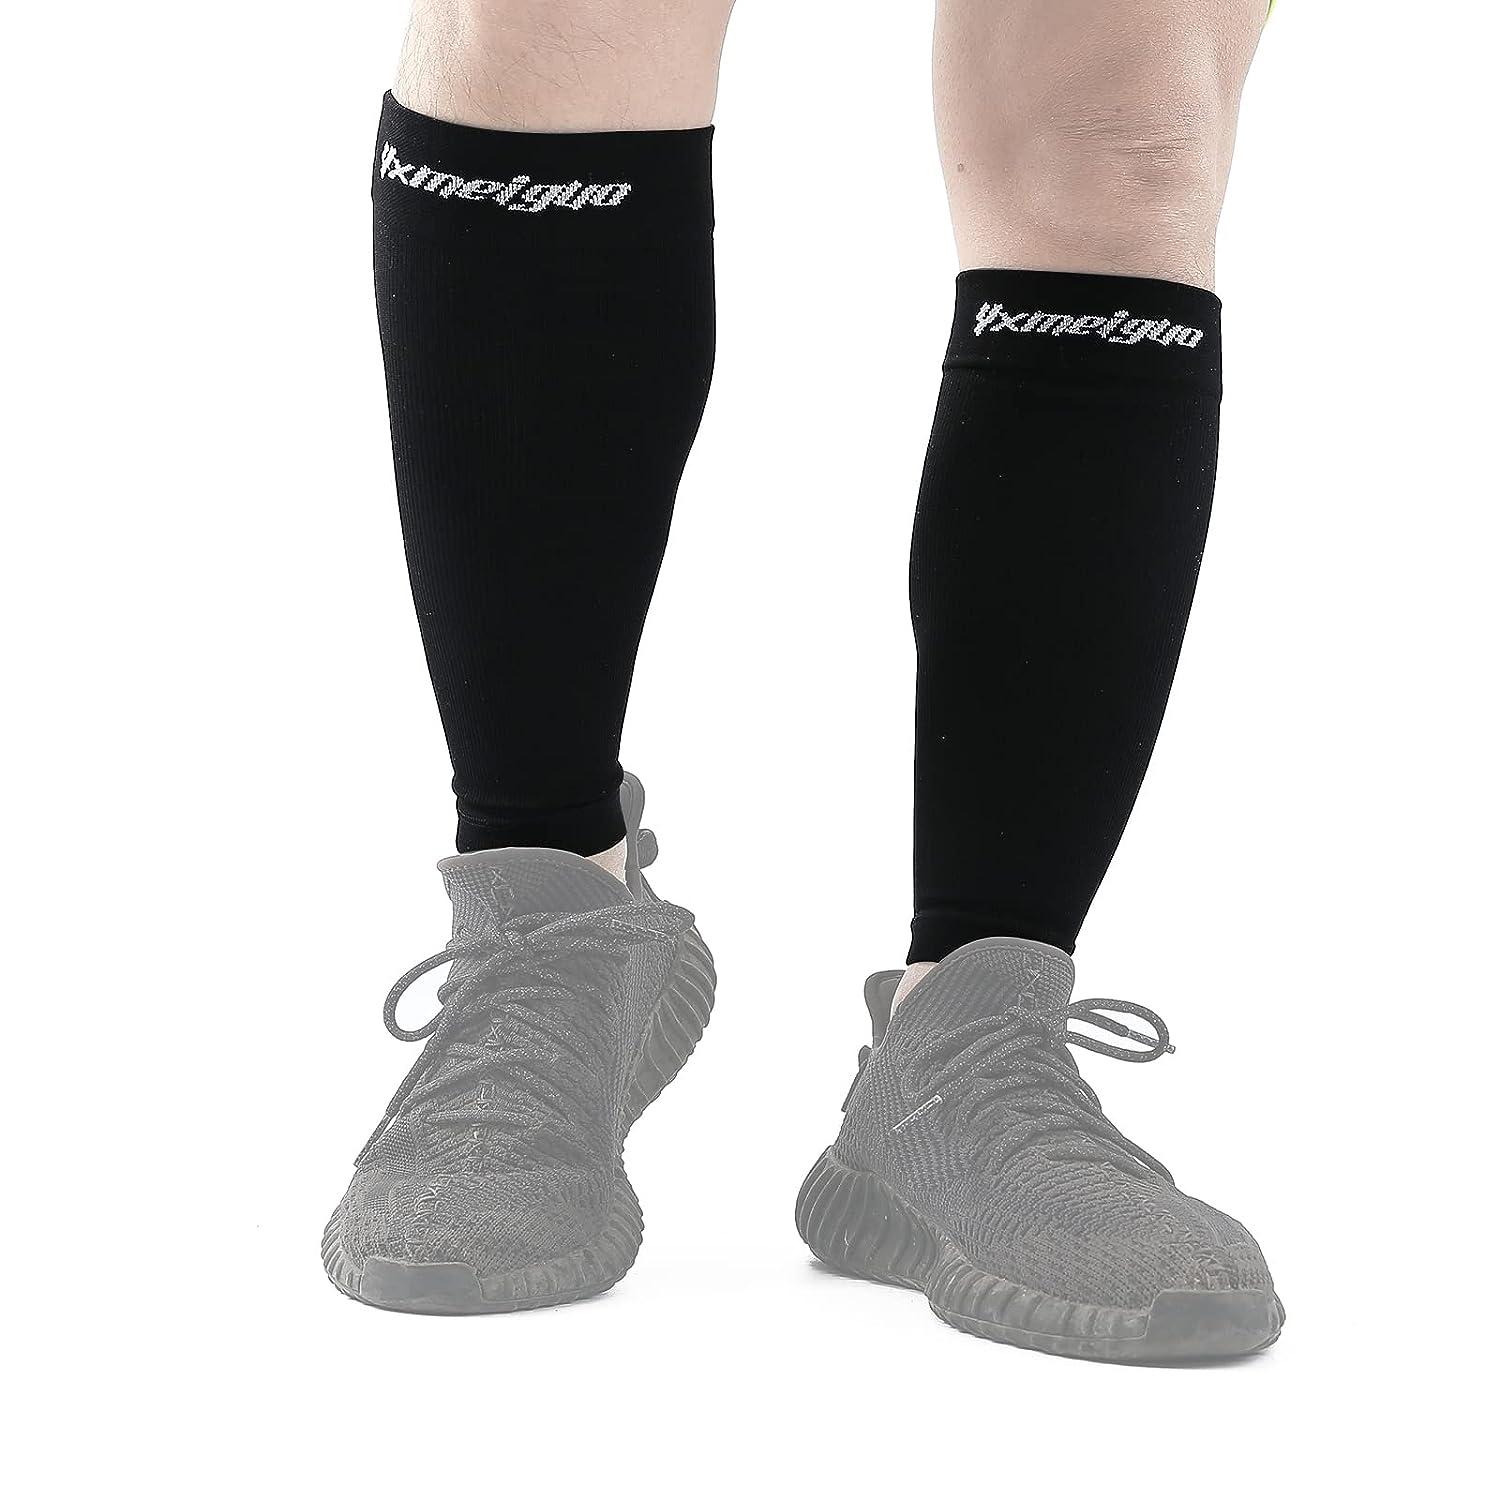 Calf Compression Sleeves - Footless Compression Socks for Women, Men.  Treatment for Lower Legs, Shin Splint, Varicose Vein & Pain Relief. Great  Support Brace for Running, Maternity, Travel White L-XL in Saudi